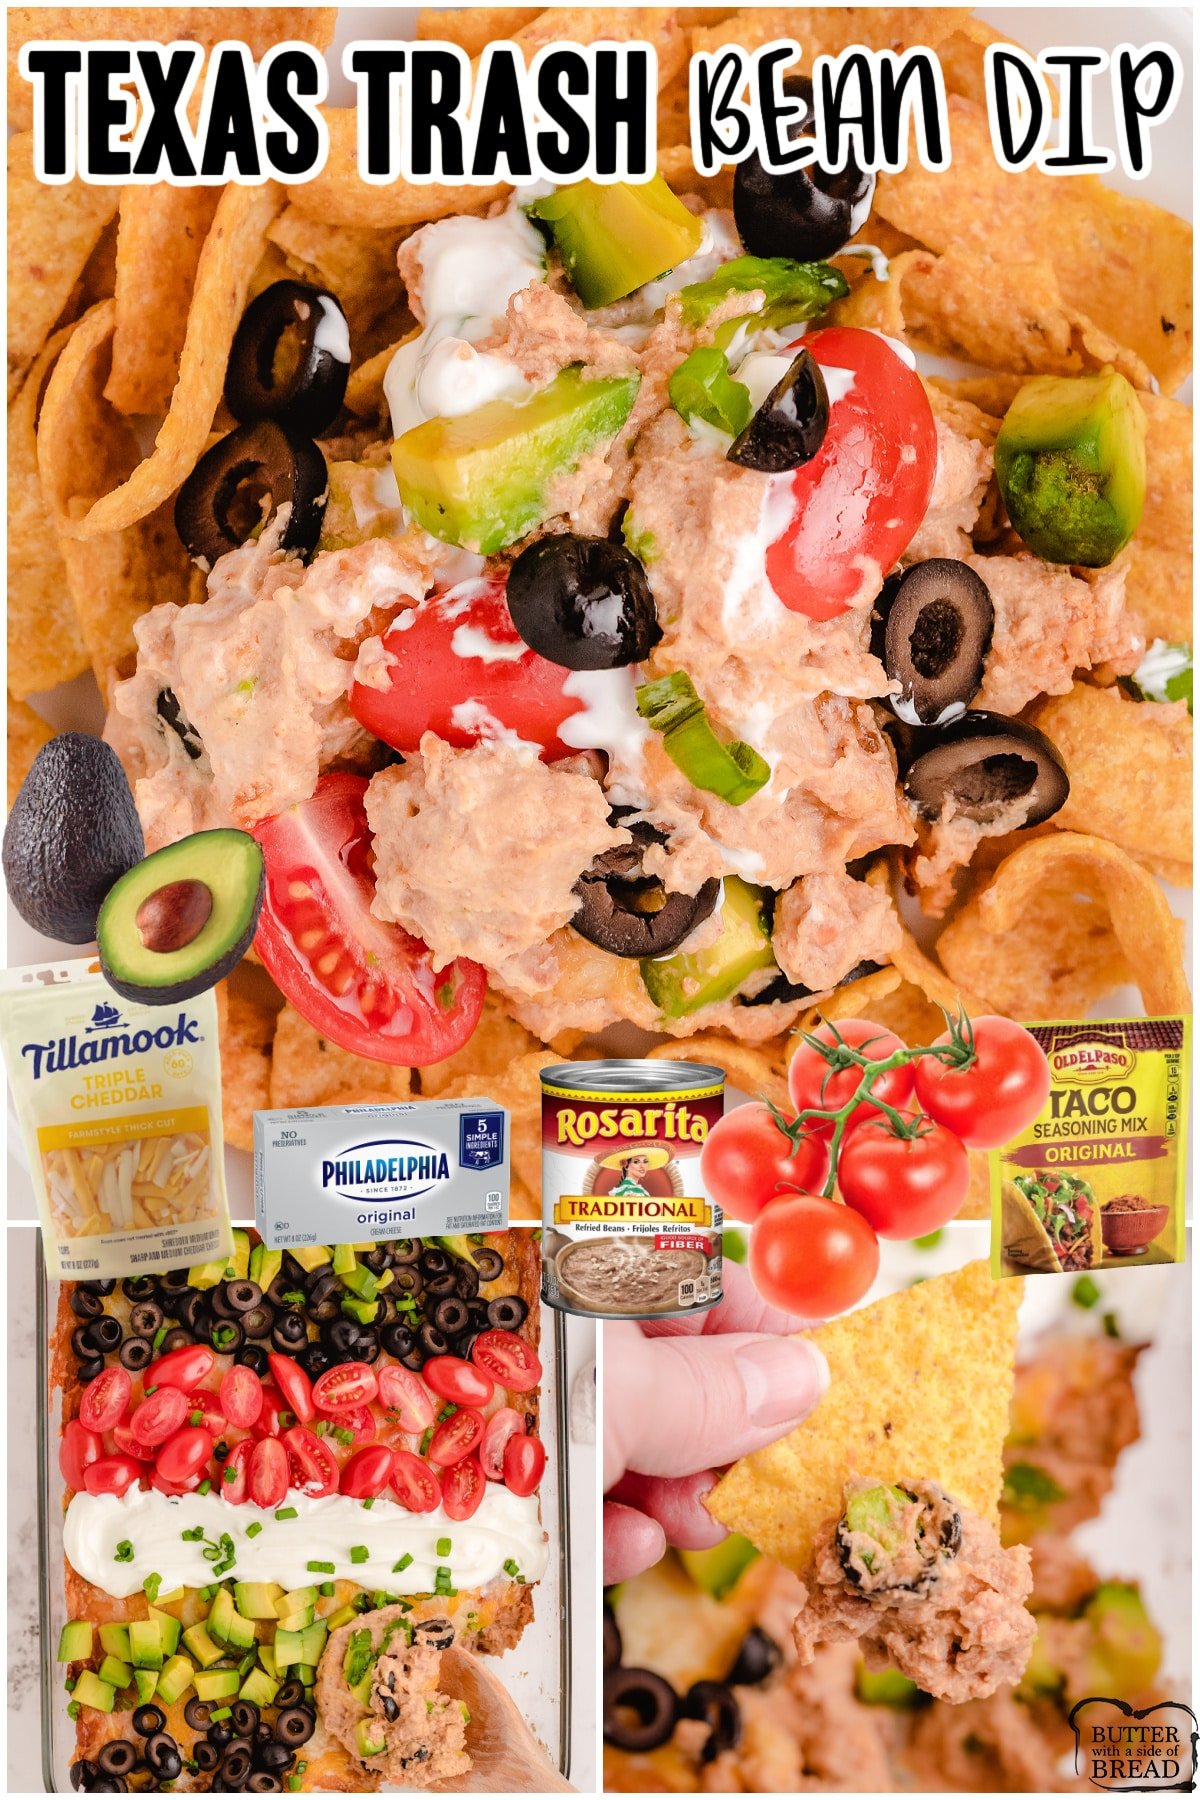 Texas Trash Bean Dip is a flavorful dip recipe with refried beans, cream cheese, taco seasoning & cheese! This layered bean dip is a hearty appetizer with great Tex-Mex flavor that everyone loves!